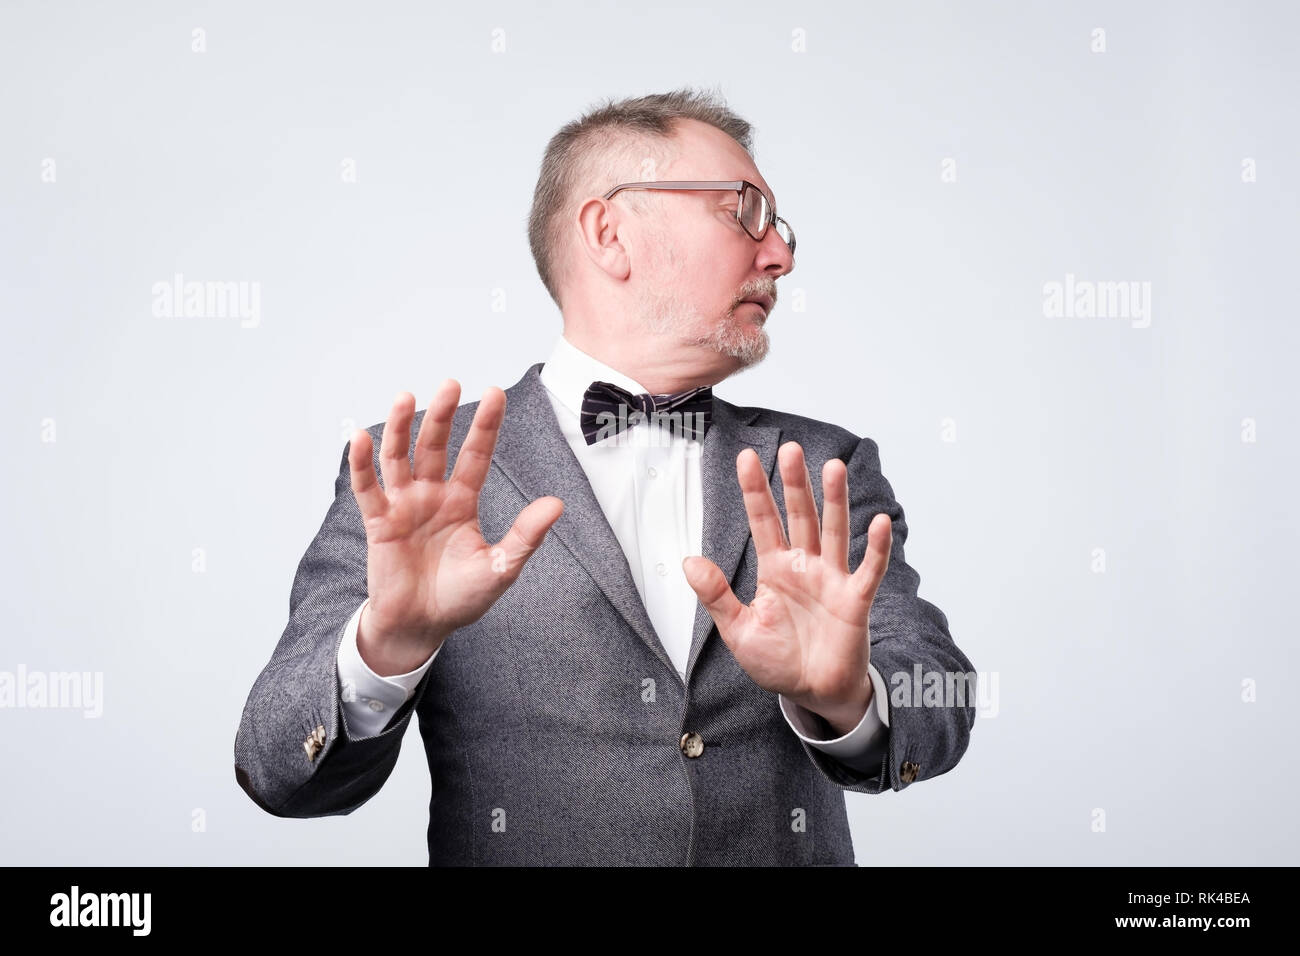 Senior male shows refusal gesture, does not want to participate in meeting Stock Photo